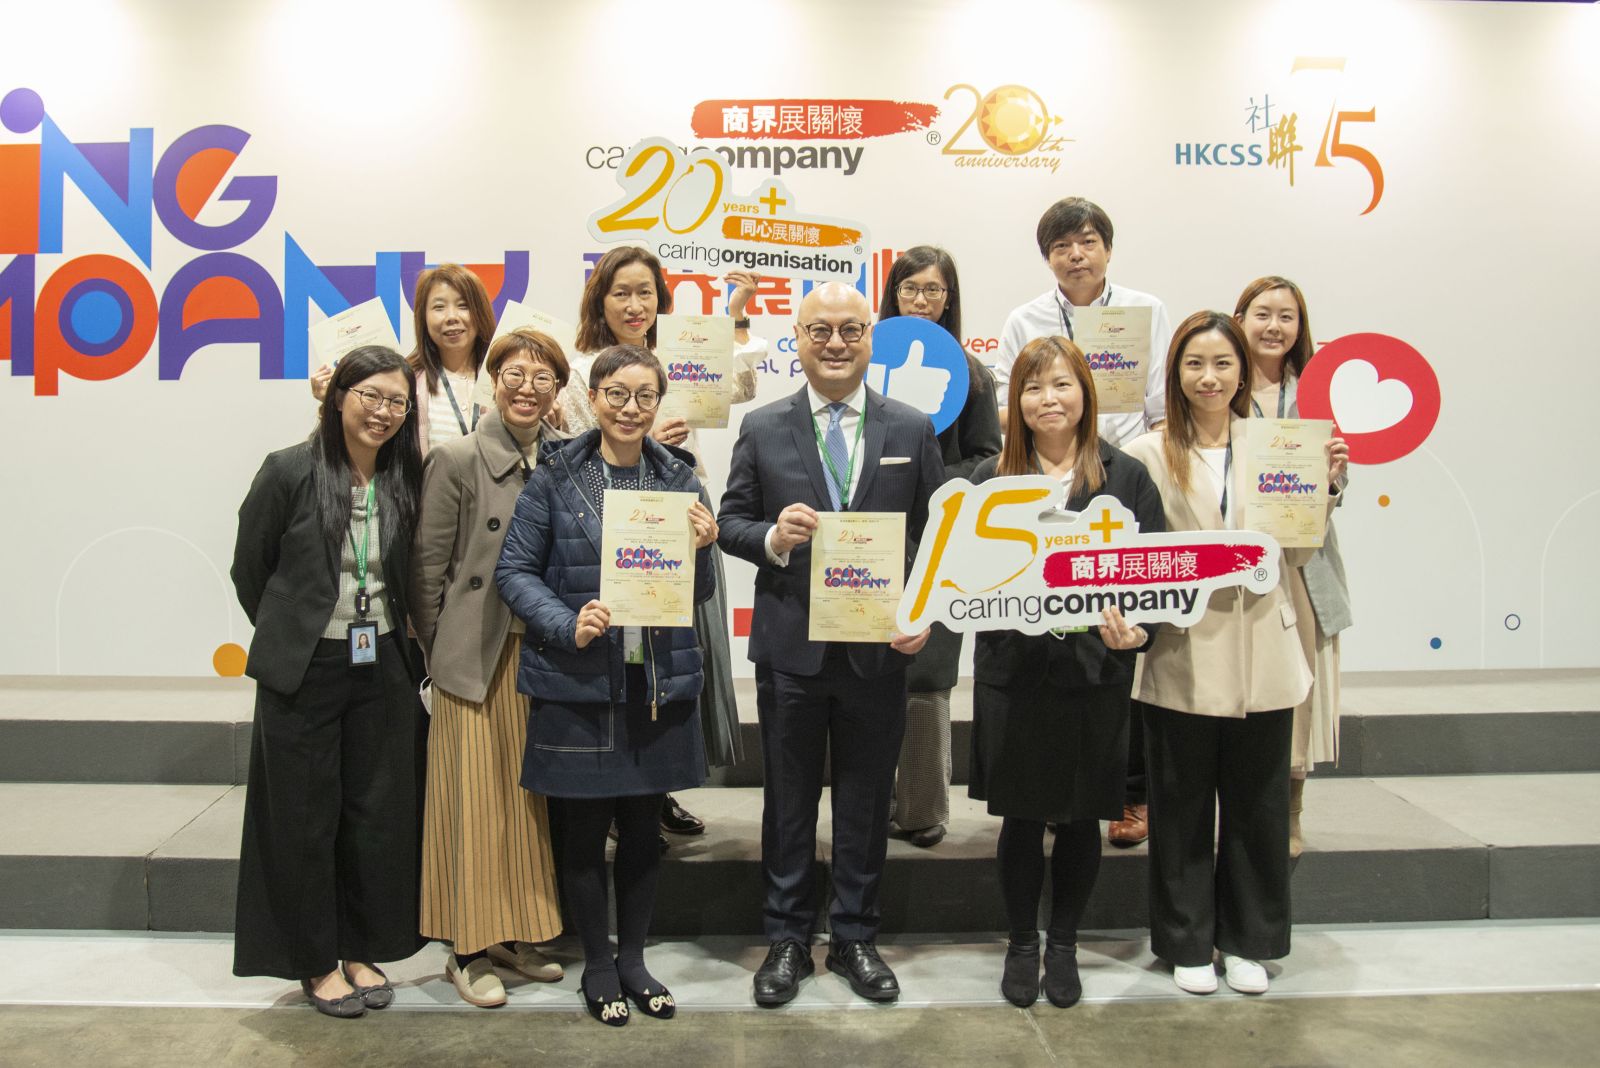 FTLife awarded “Caring Company” logo for 21 consecutive years